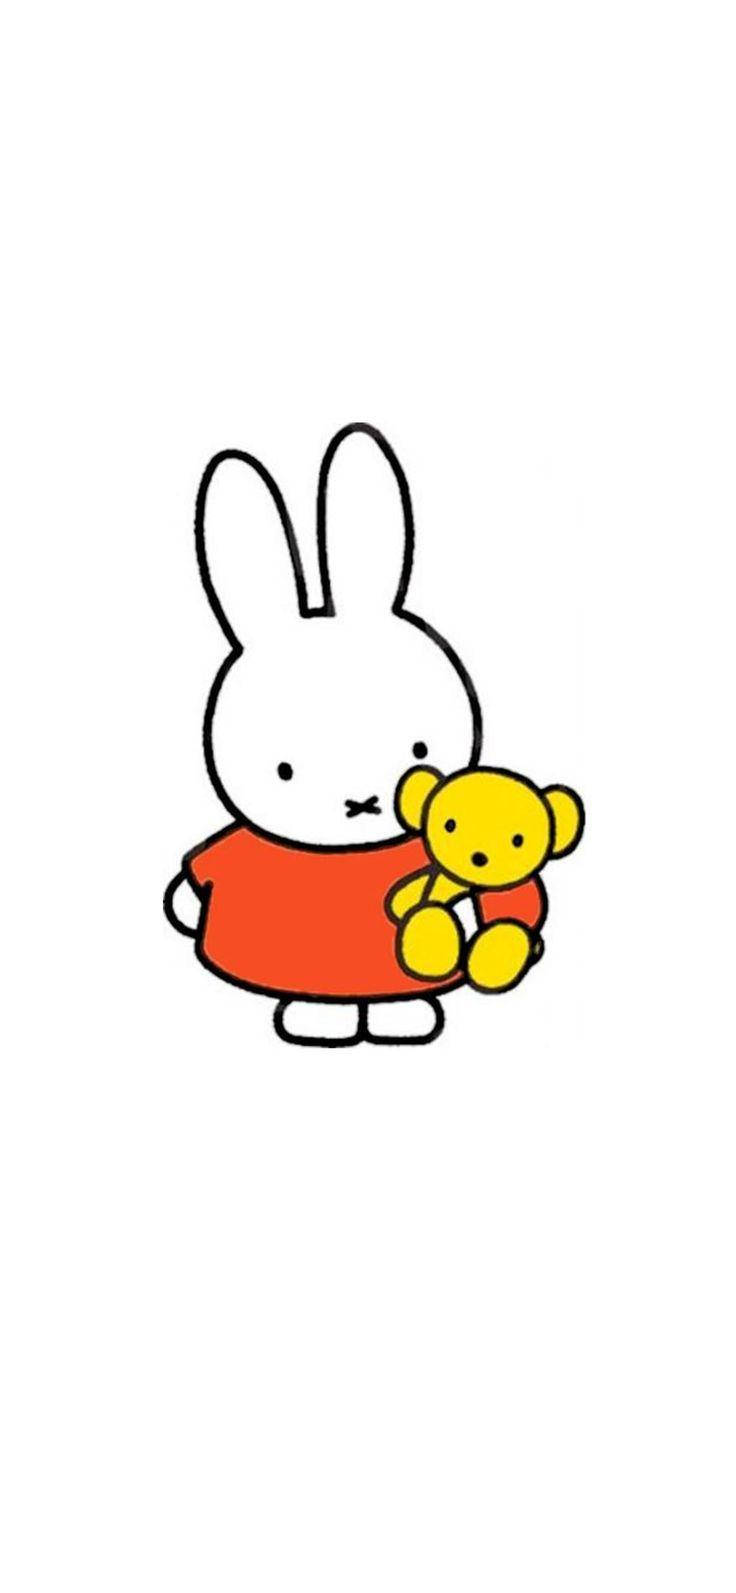 Miffy And Yellow Teddy Bear Picture